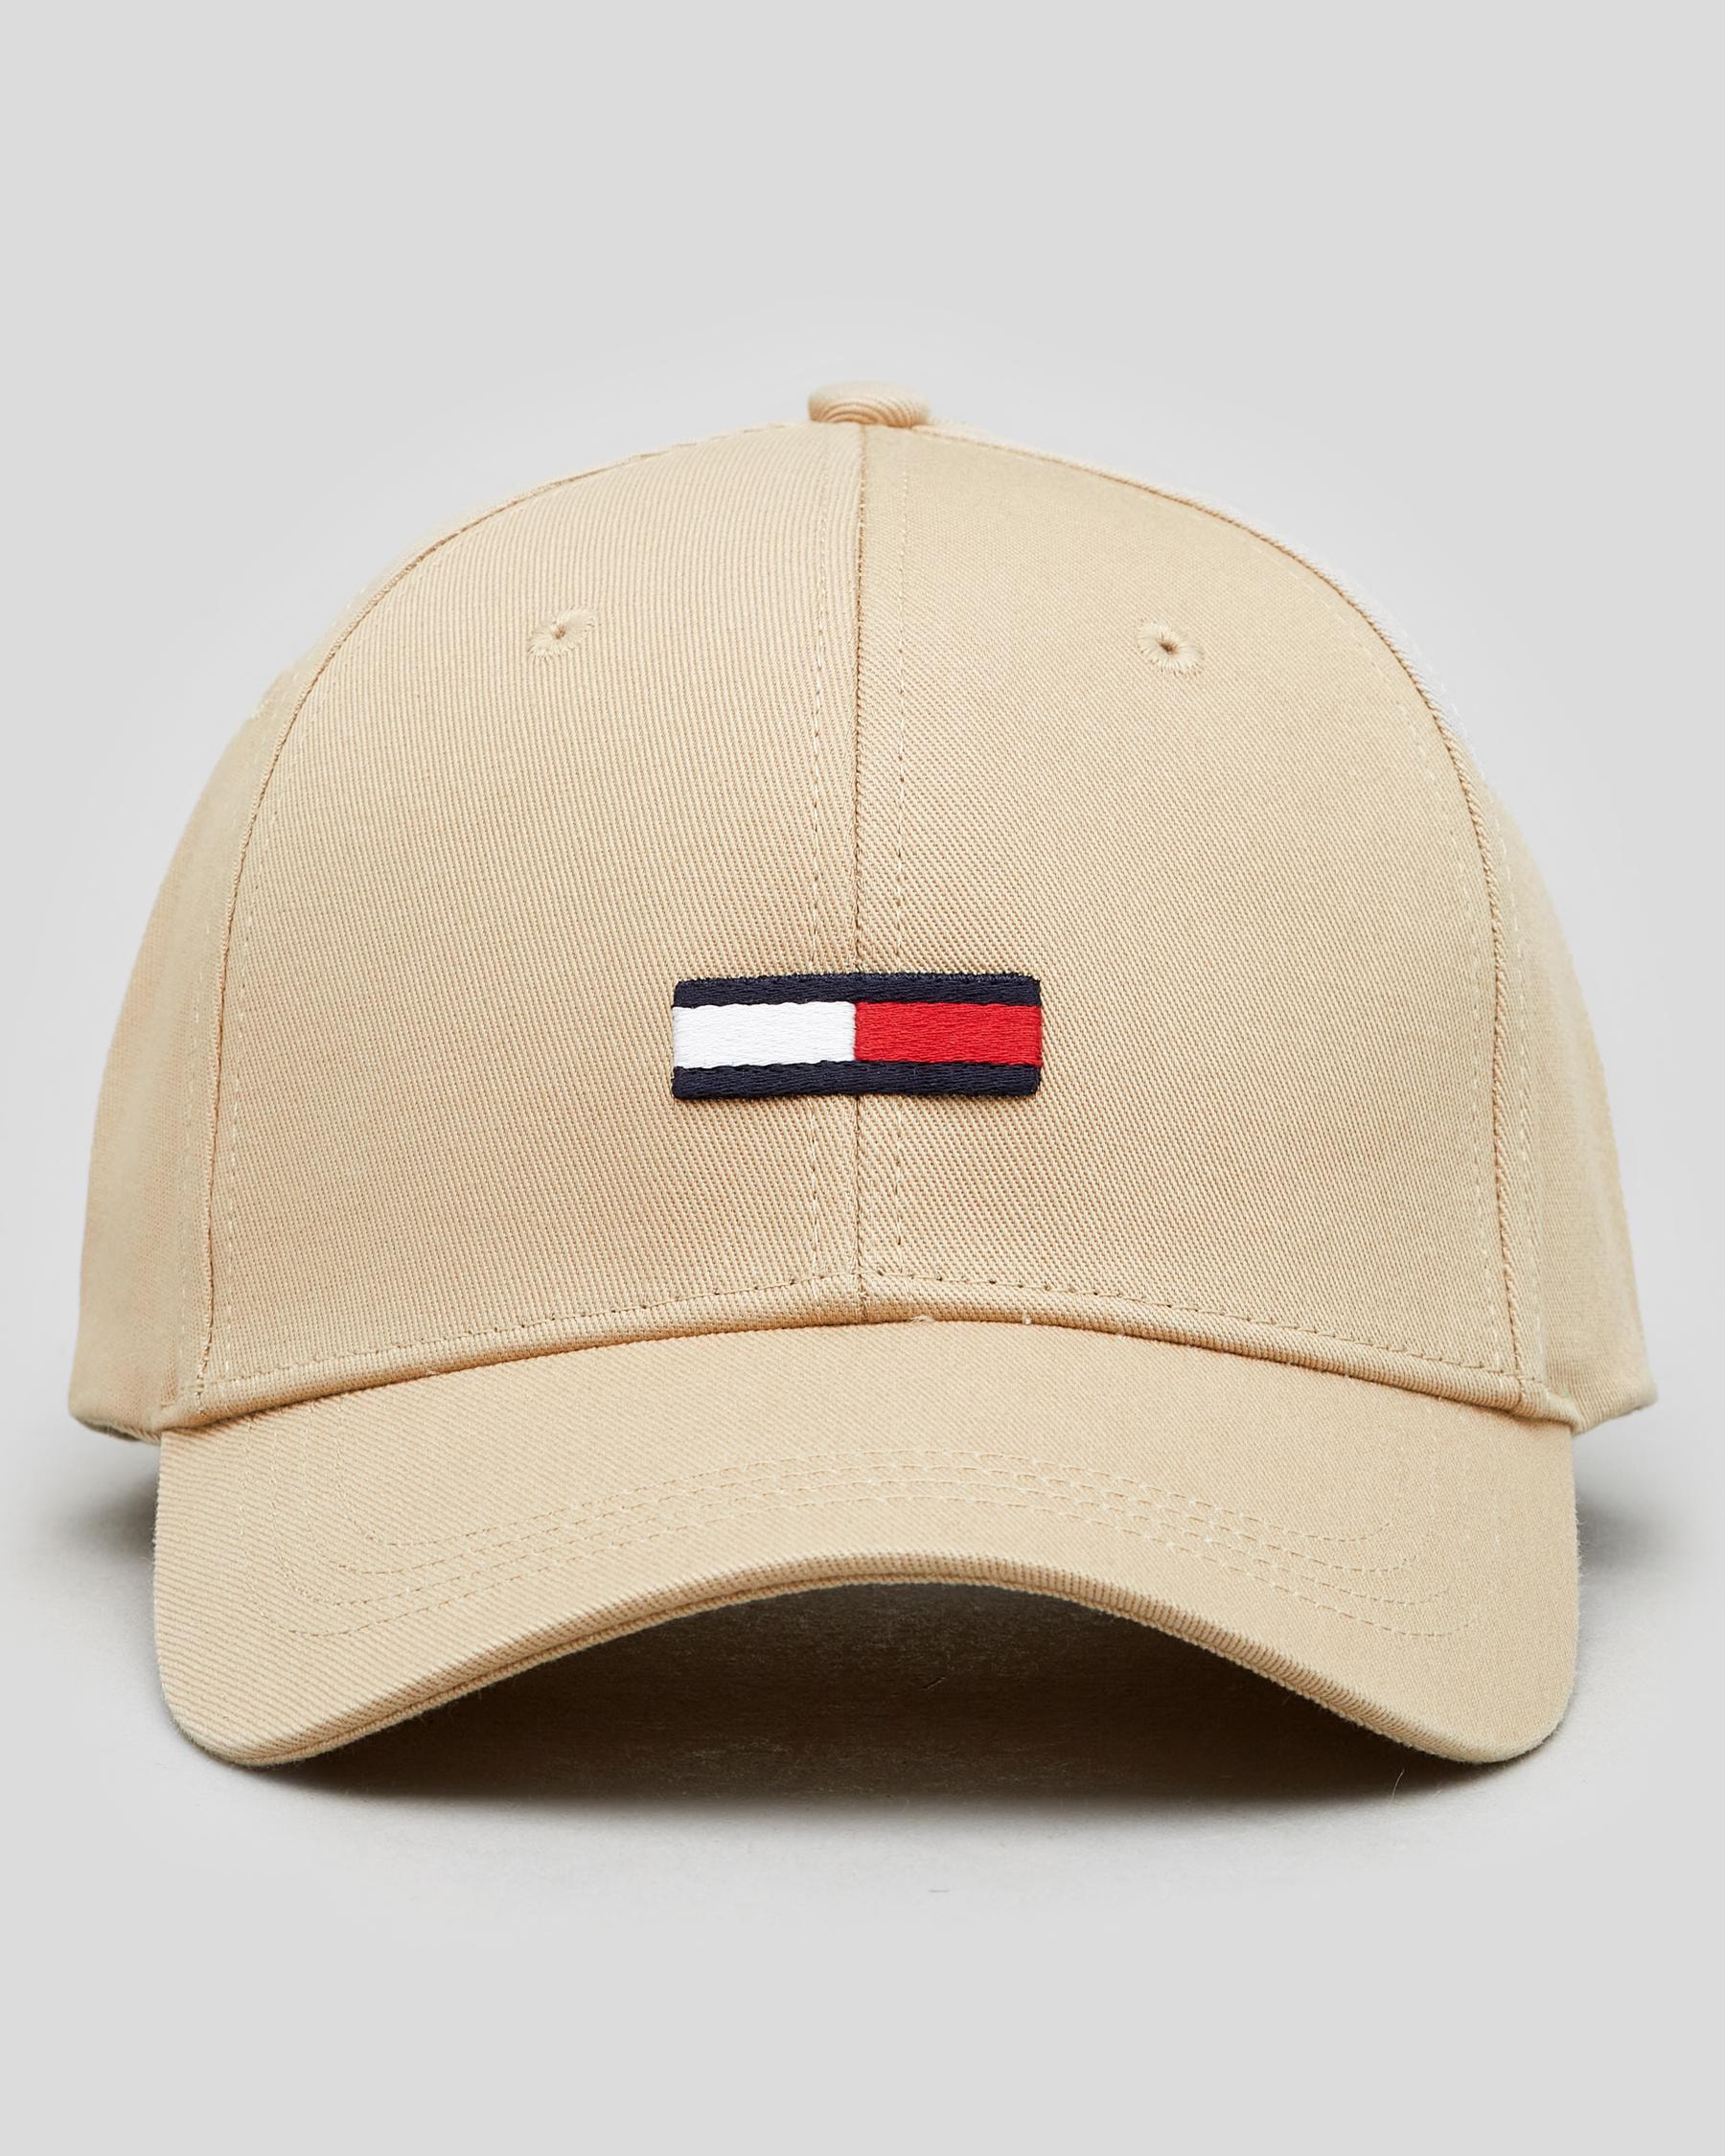 United - & States FREE* In Returns Shipping Easy Hilfiger TJM Cap - Flag Soft Beach Beige City Tommy